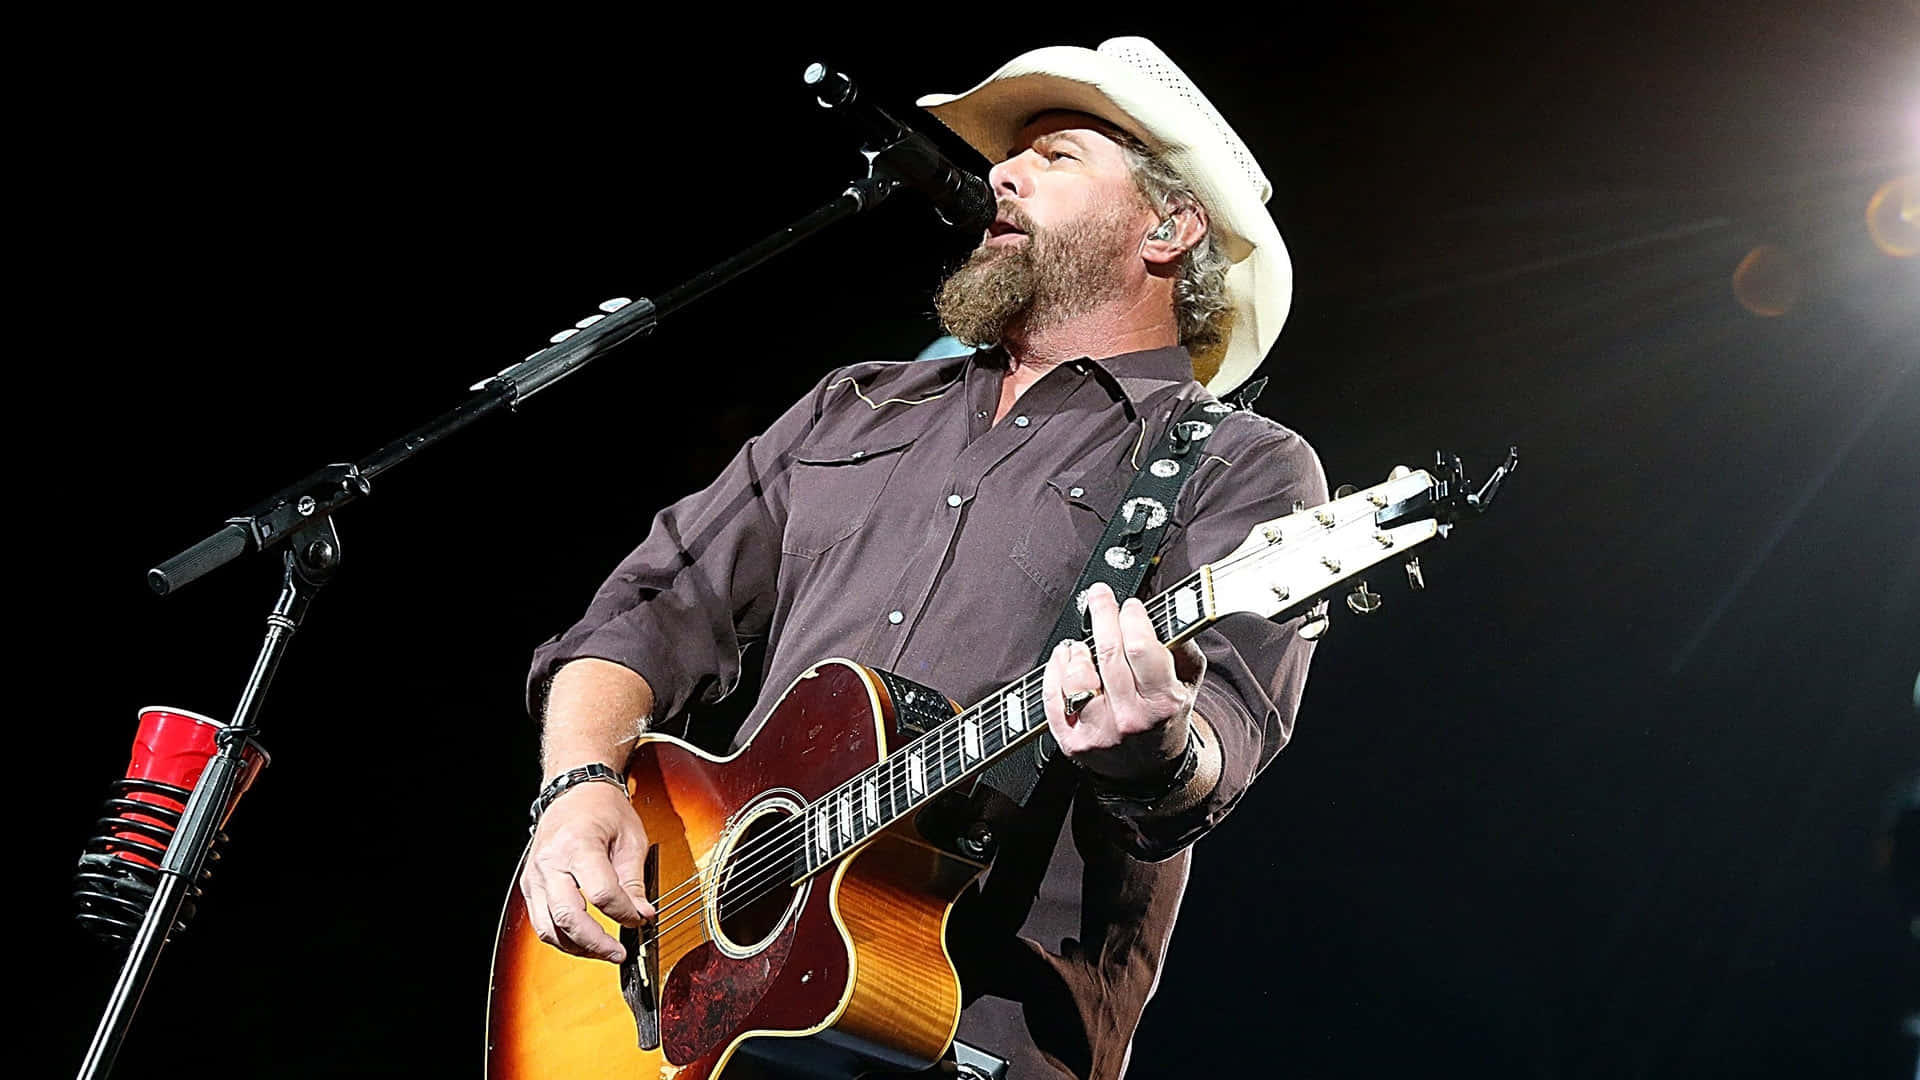 Toby Keith Performing Live Wallpaper